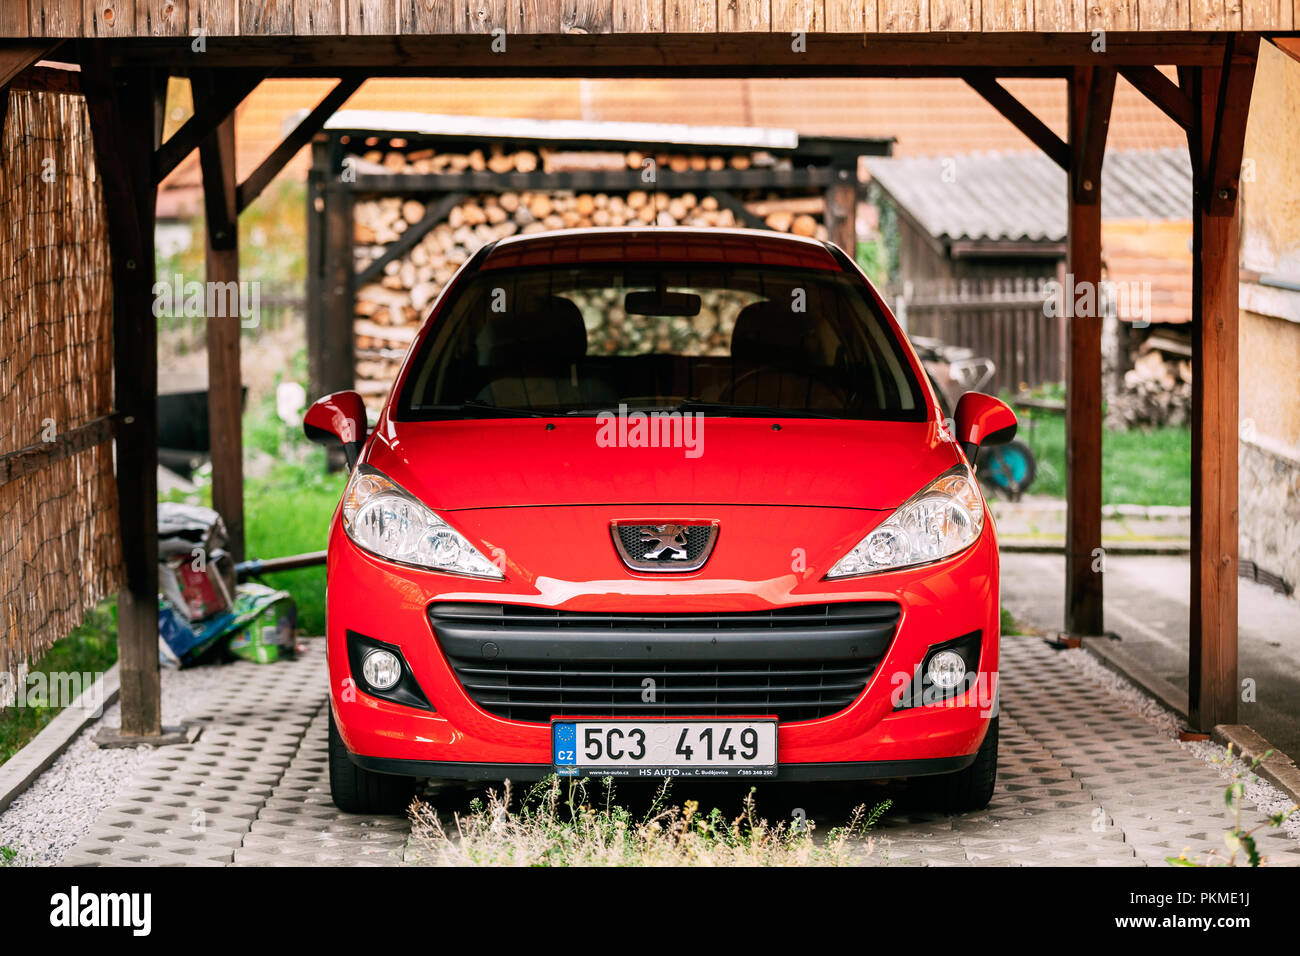 Cesky Krumlov, Czech Republic - September 26, 2017: Red Peugeot 207 Car Parked In Yard. Peugeot 207 was a supermini produced by the French automaker P Stock Photo